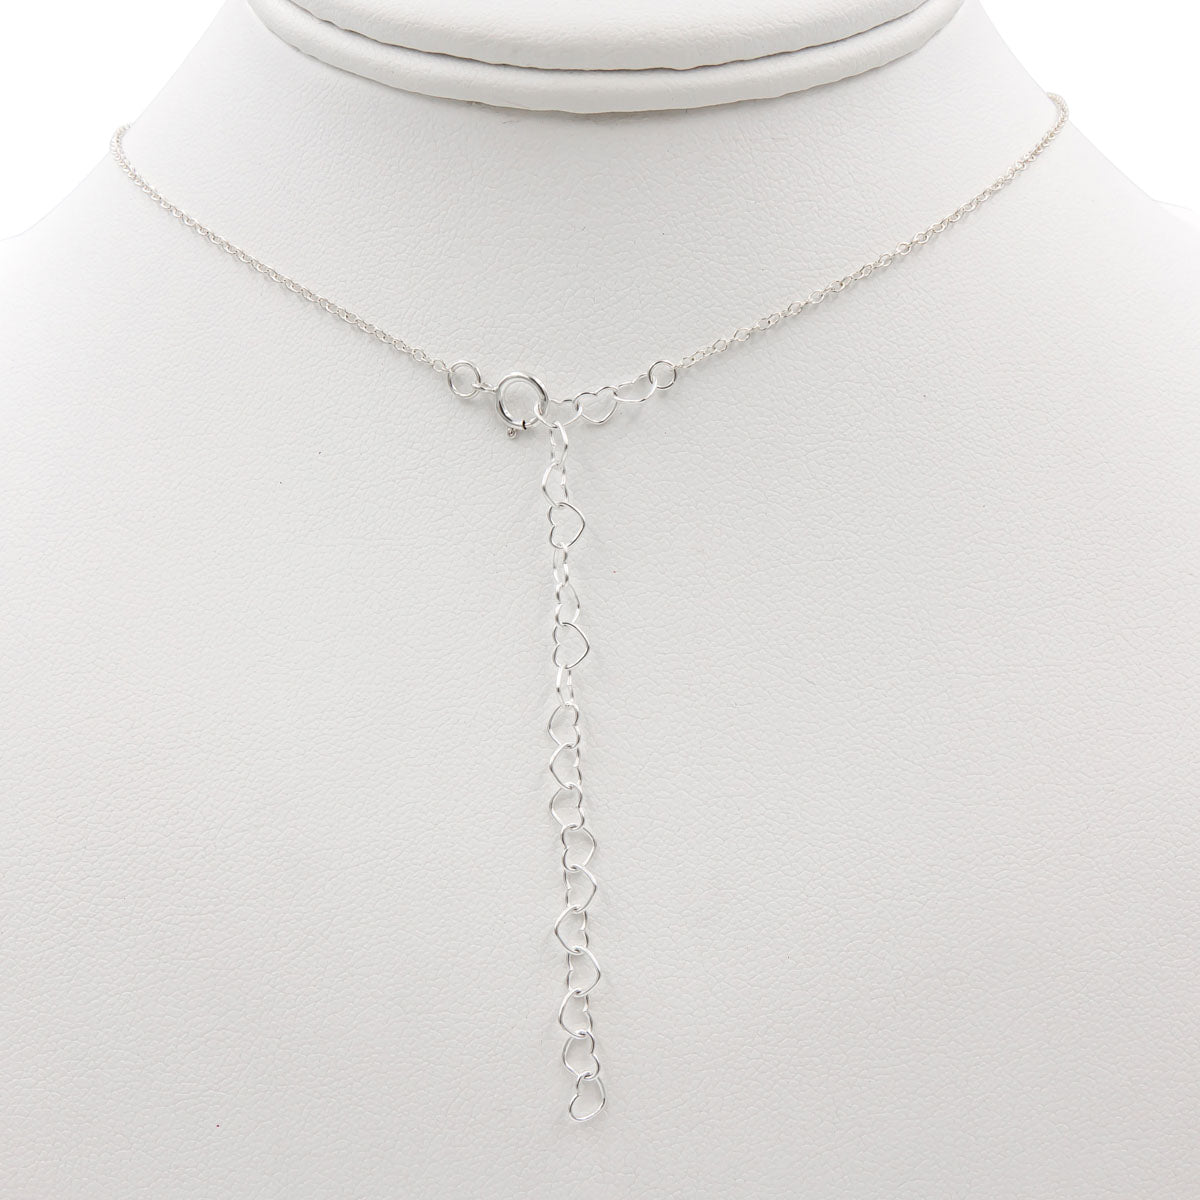 Handmade, eco-friendly Earth Song Jewelry Sterling Silver necklaces are adjustable with a 3” heart chain!